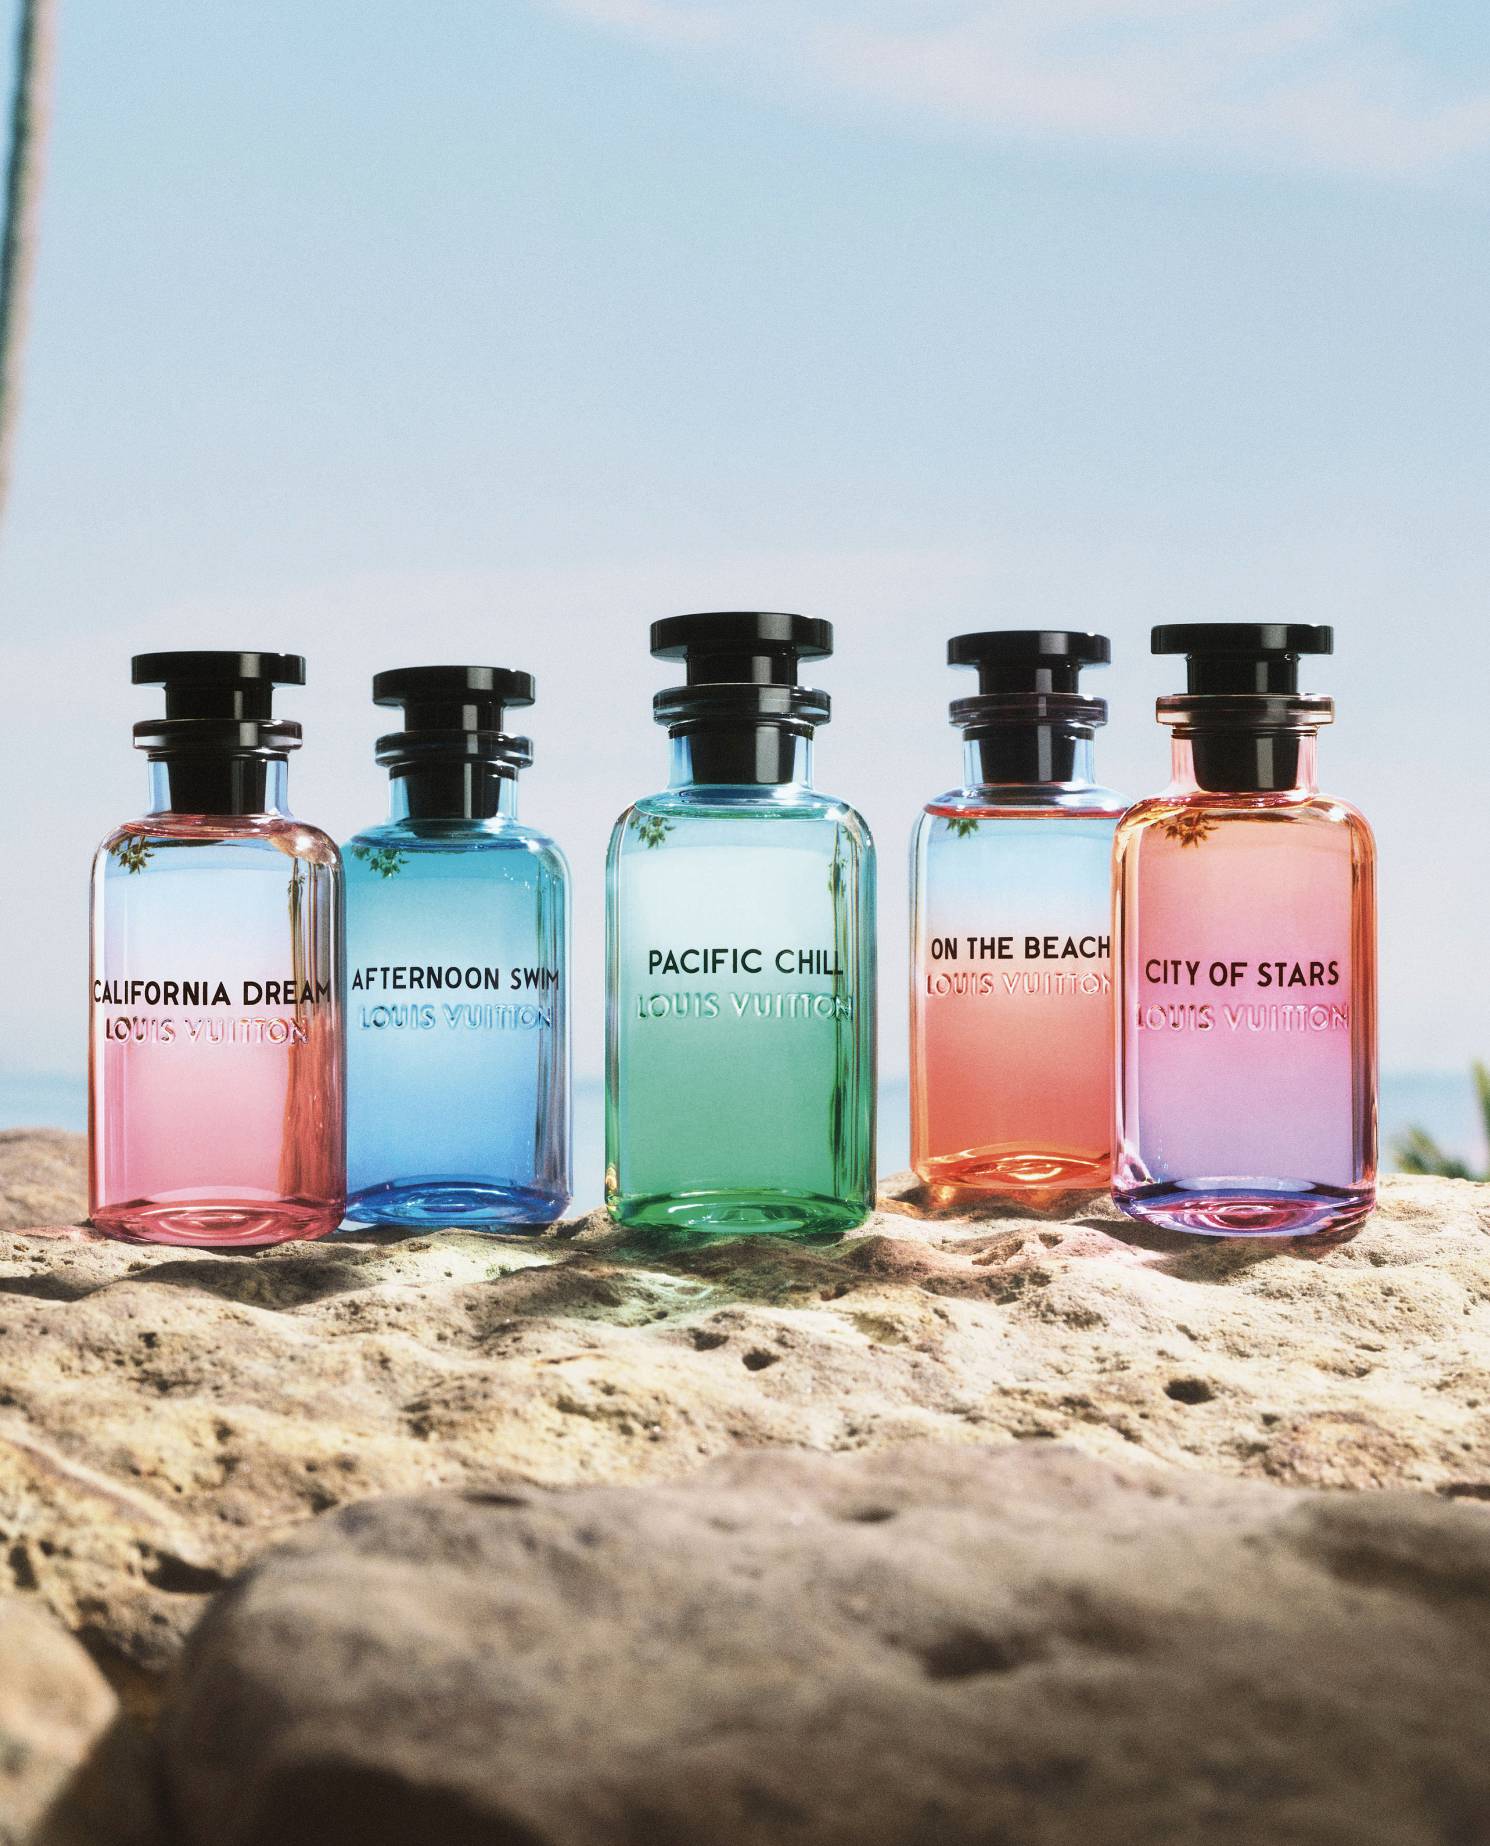 LOUIS VUITTON LAUNCHES PACIFIC CHILL, INSPIRED BY CALIFORNIAN